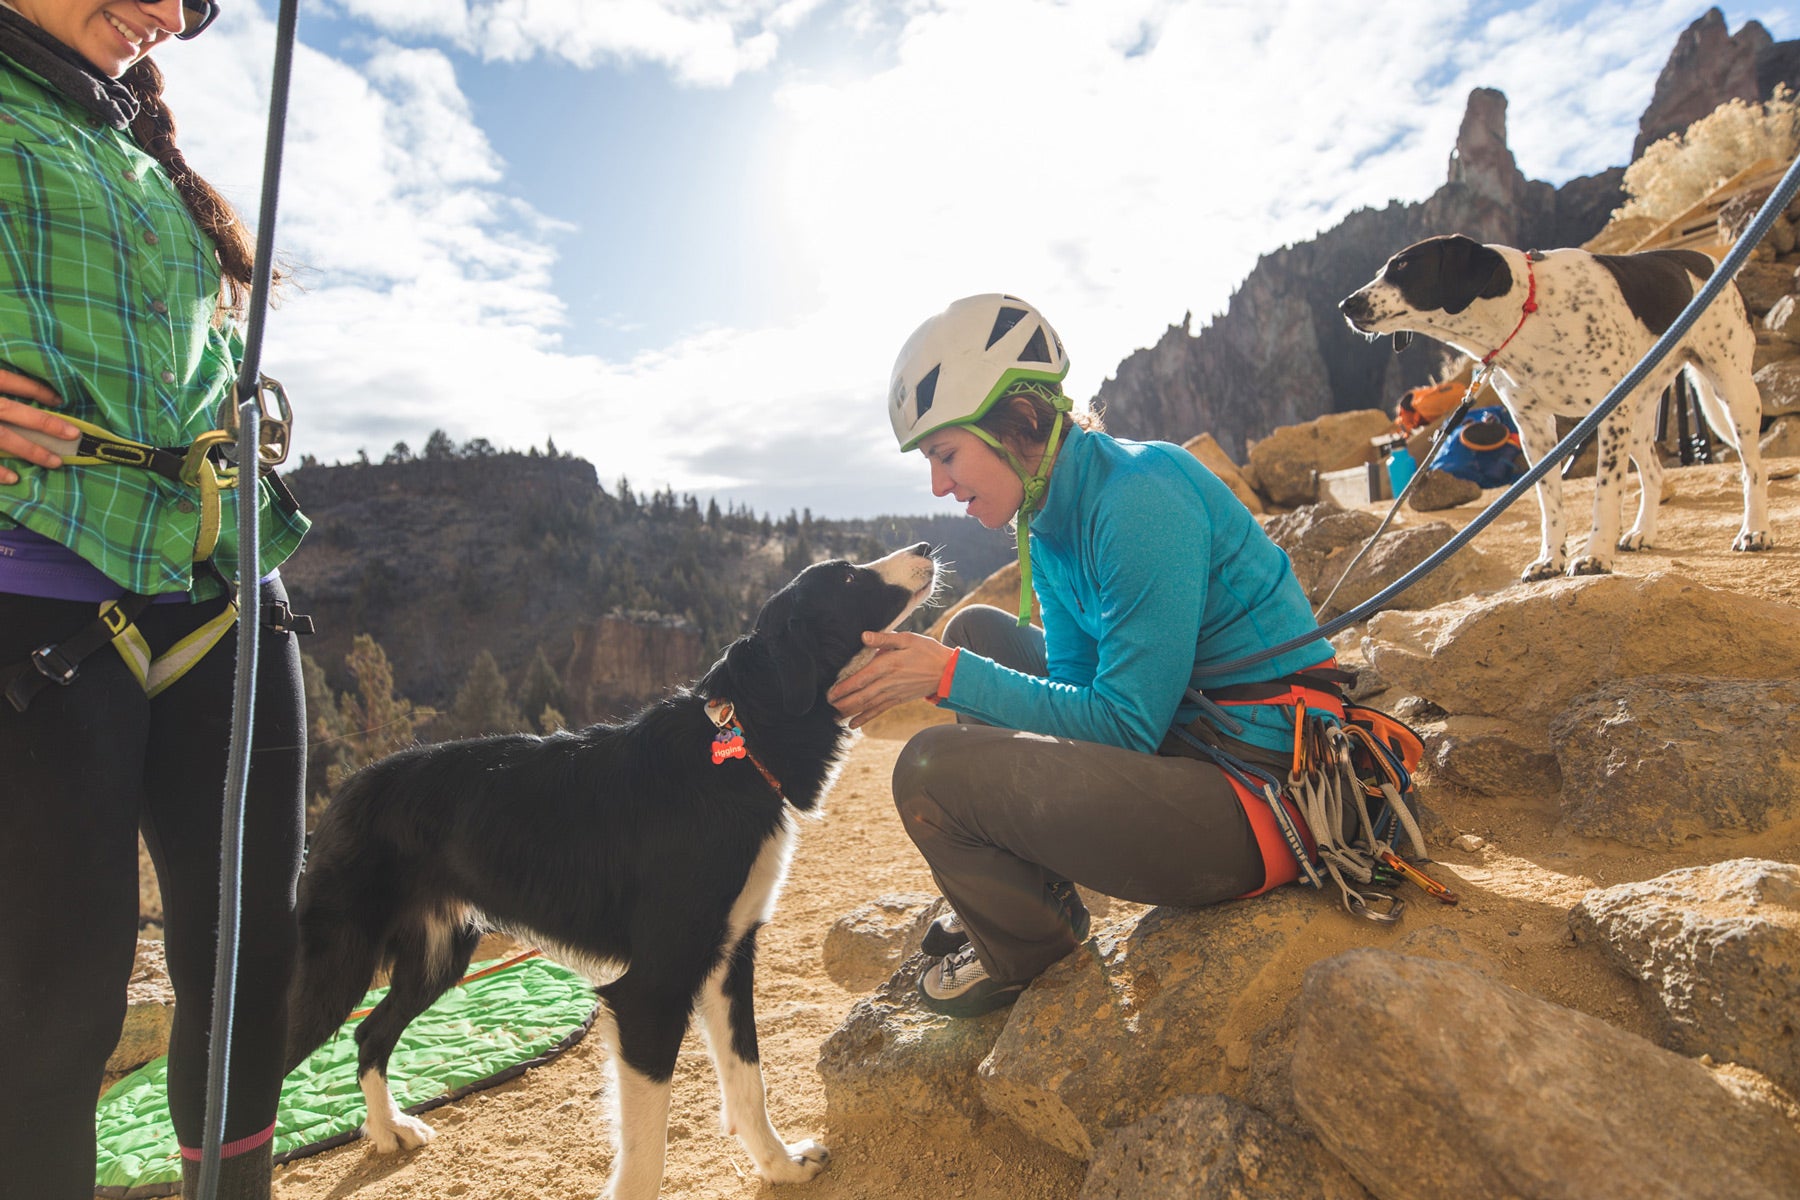 Border collie dog gives climber kisses after climb while other dog looks on.